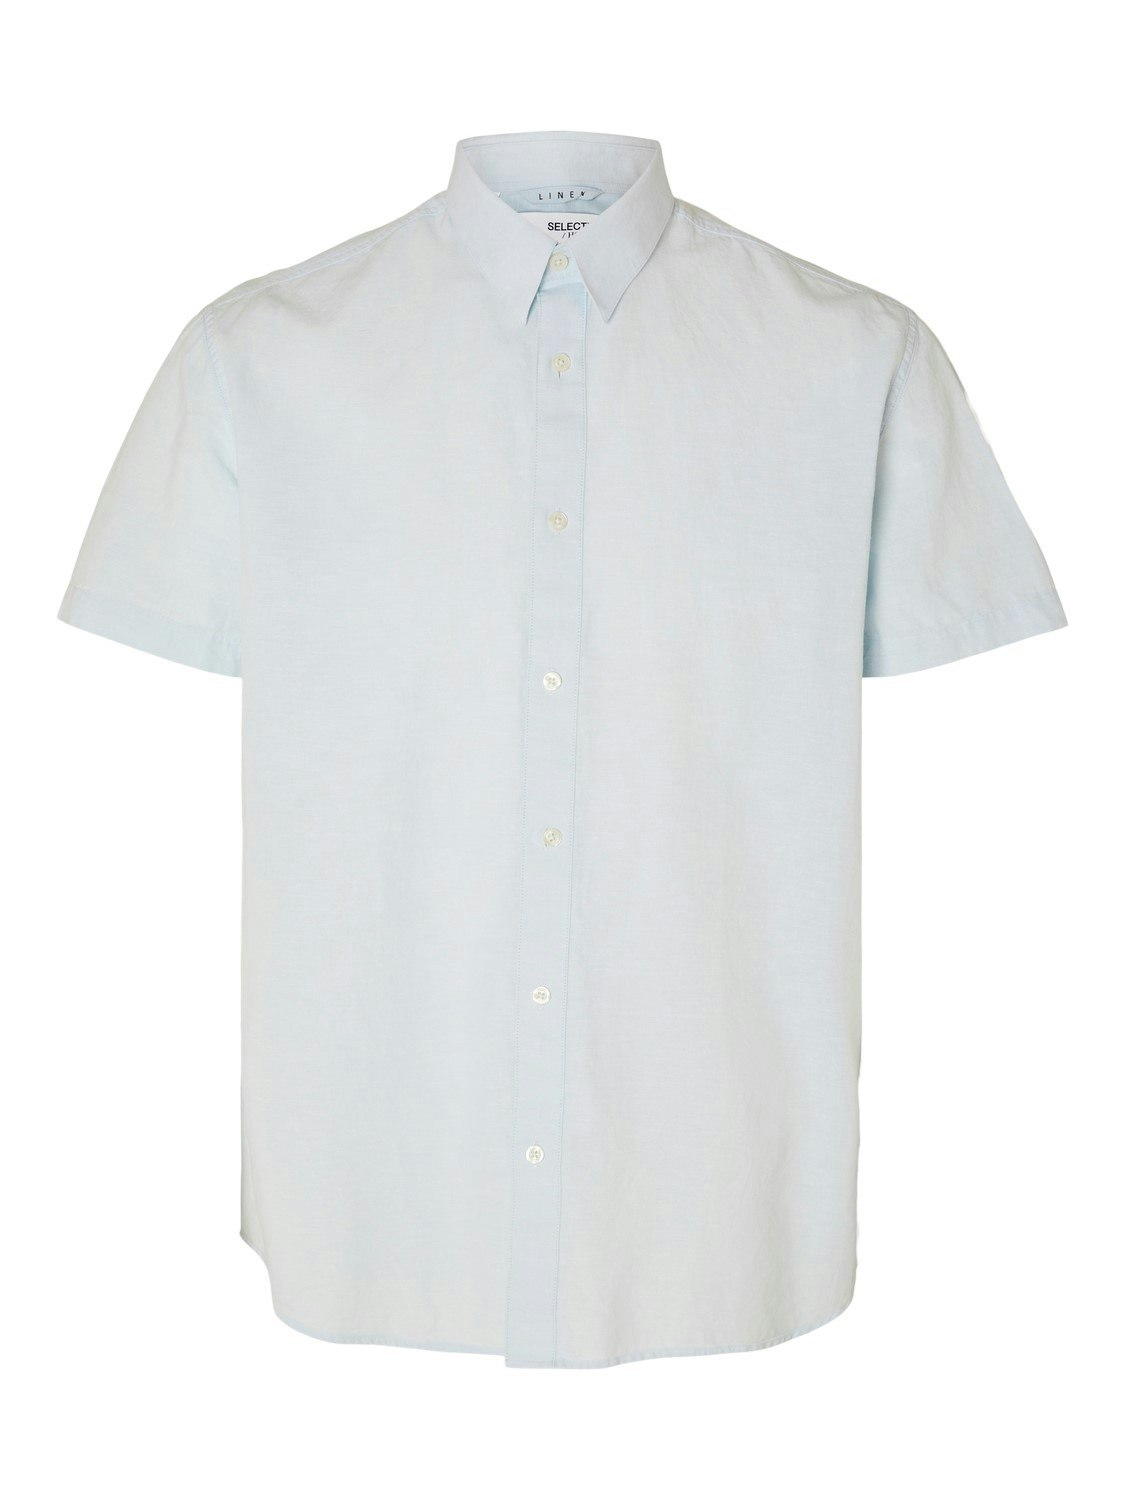 SlhRegnew-Linen-Shirt SS Classic